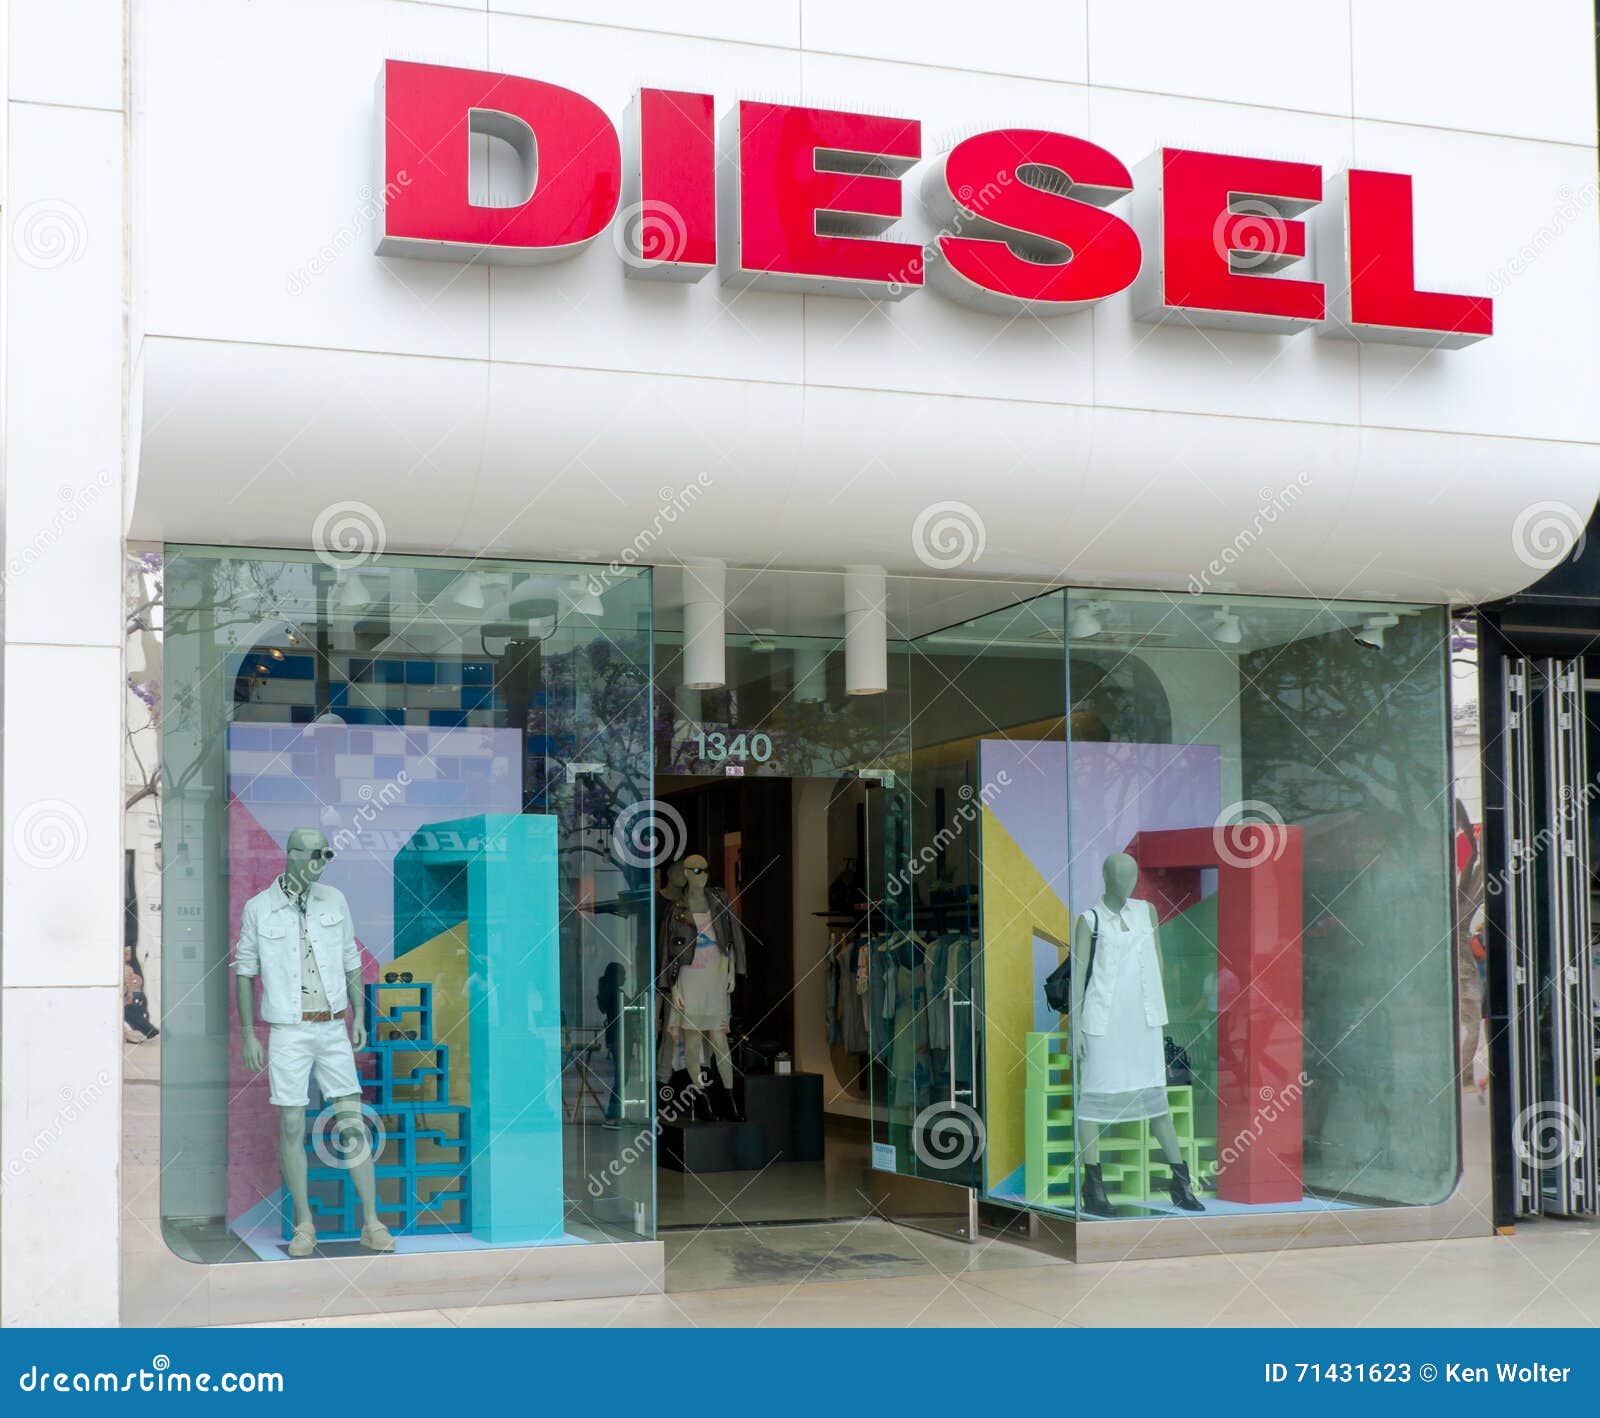 filter Ik was verrast Dollar 491 Diesel Clothing Photos - Free & Royalty-Free Stock Photos from  Dreamstime